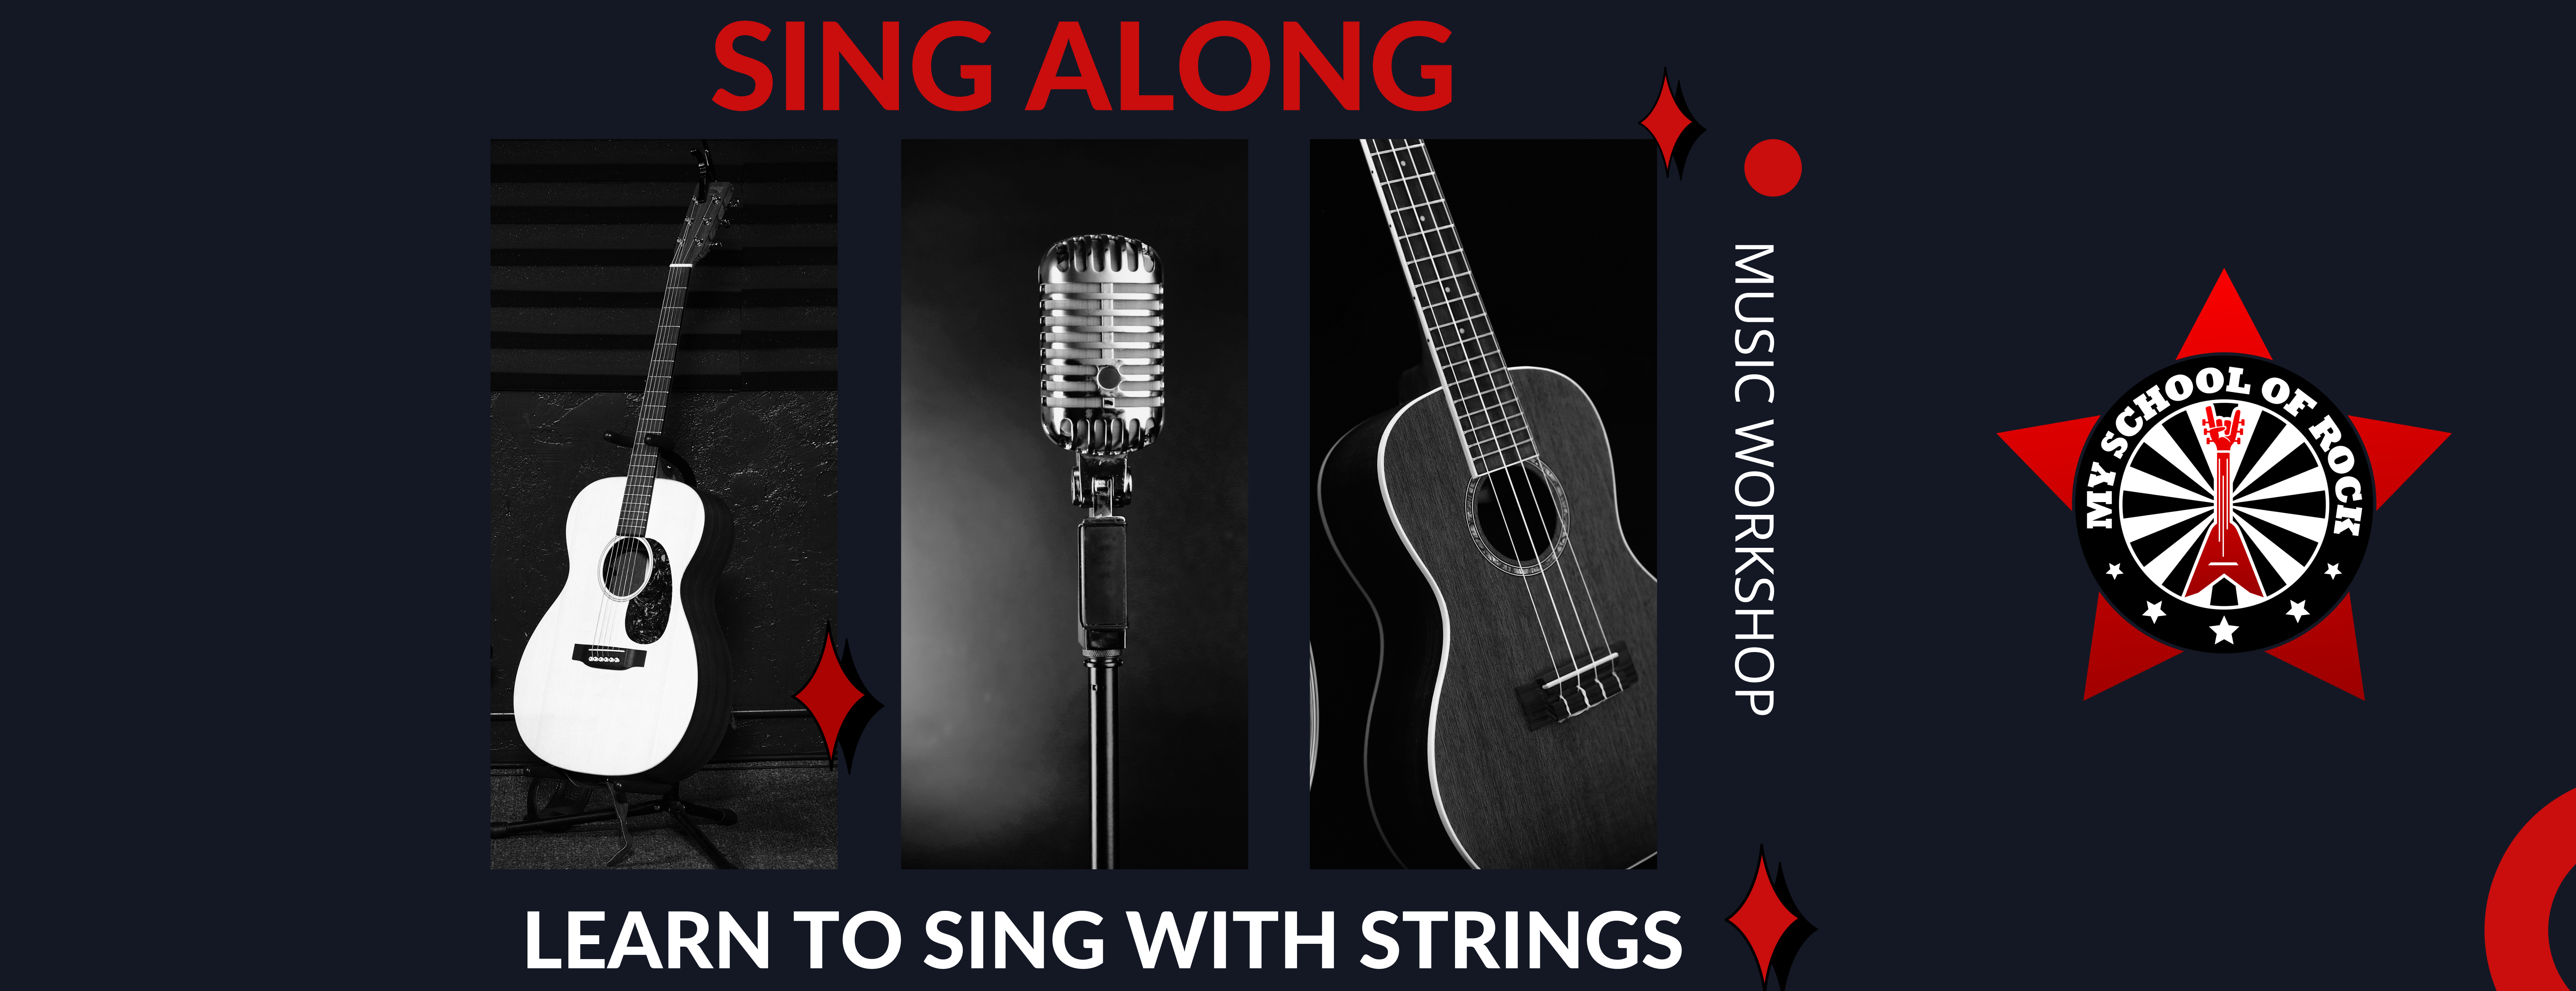 Sing-Along:Learn to Sing with Strings